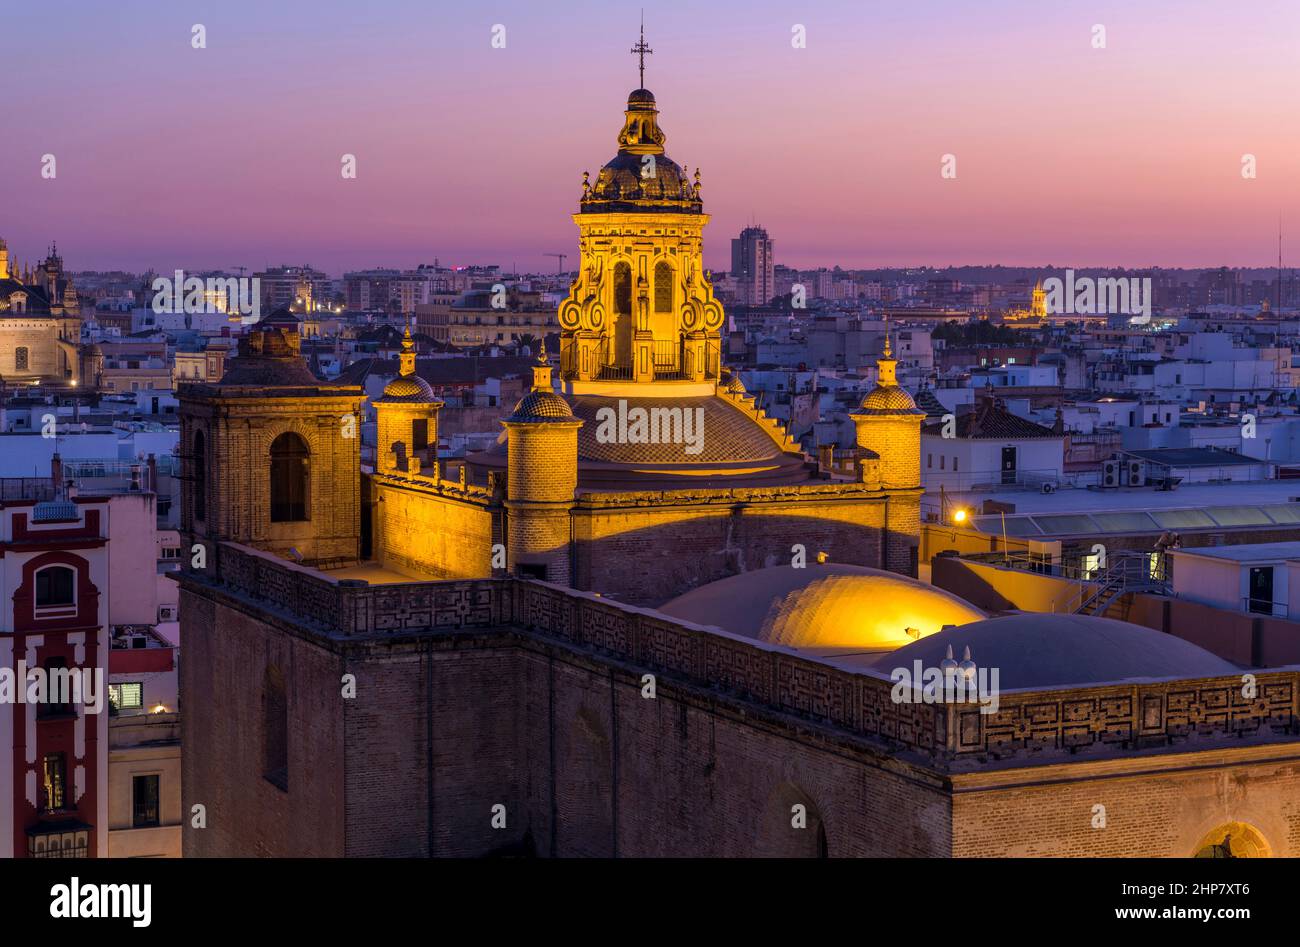 Golden Dome - A dusk view of illuminated dome and bell tower at top of the 16th-century Renaissance style The Annunciation Church in Seville, Spain. Stock Photo